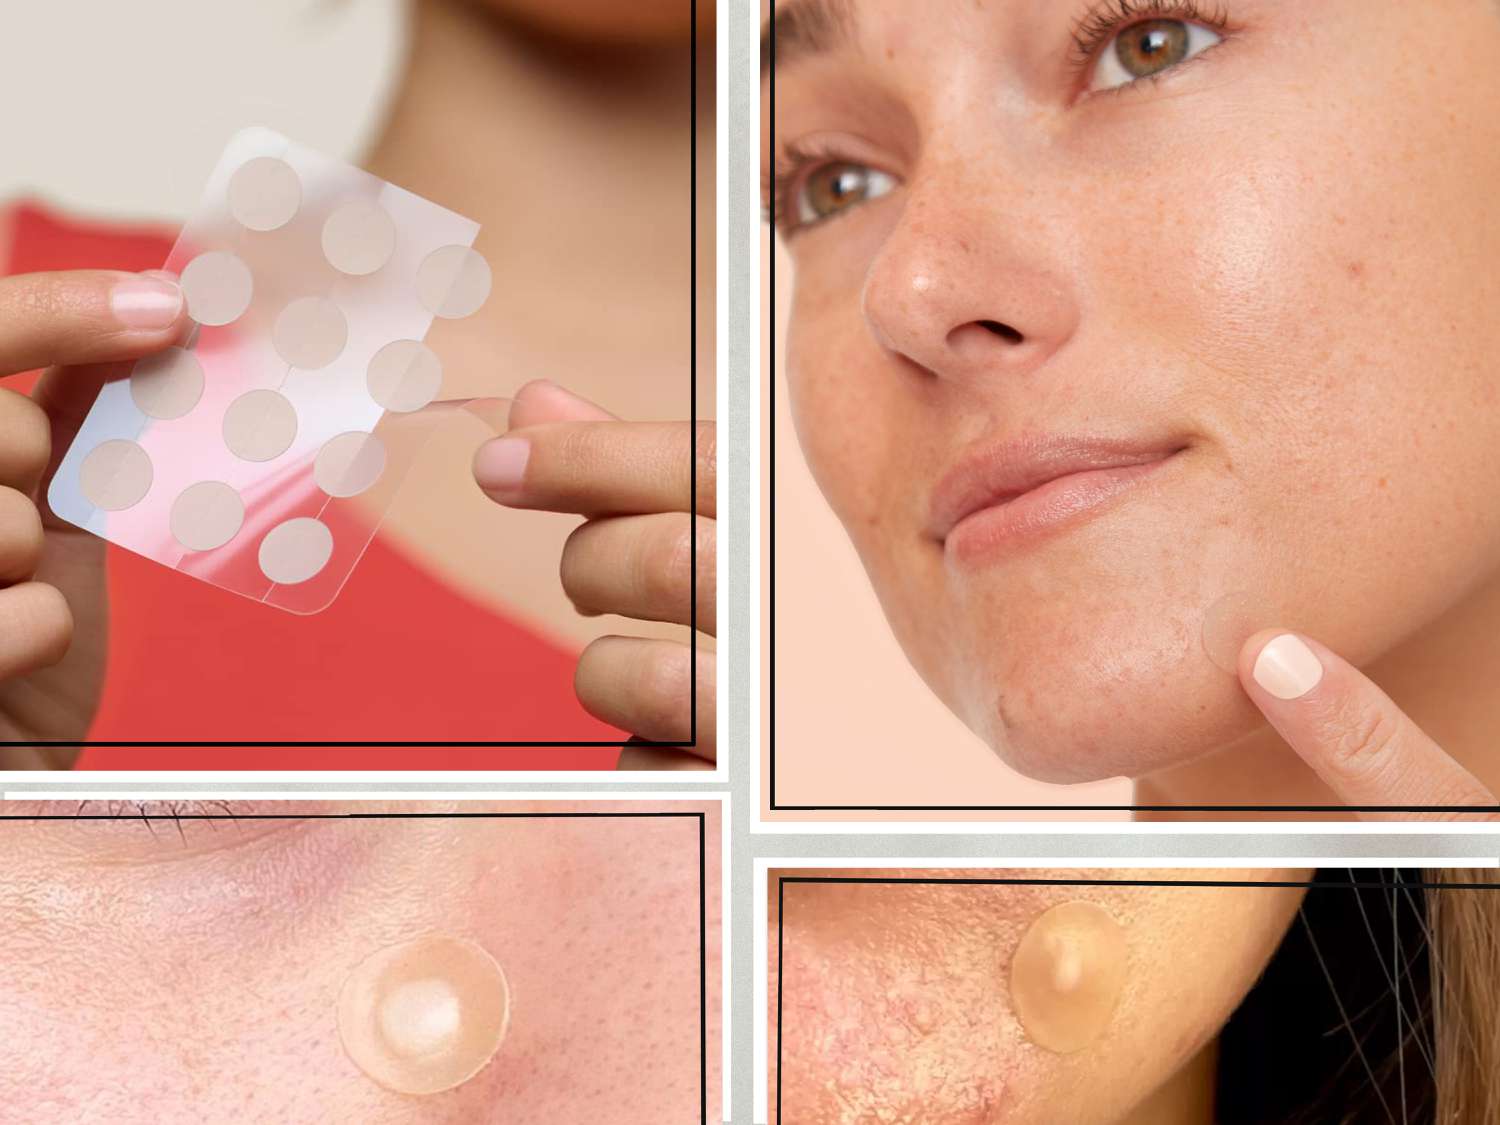 How Do Pimple Patches Work